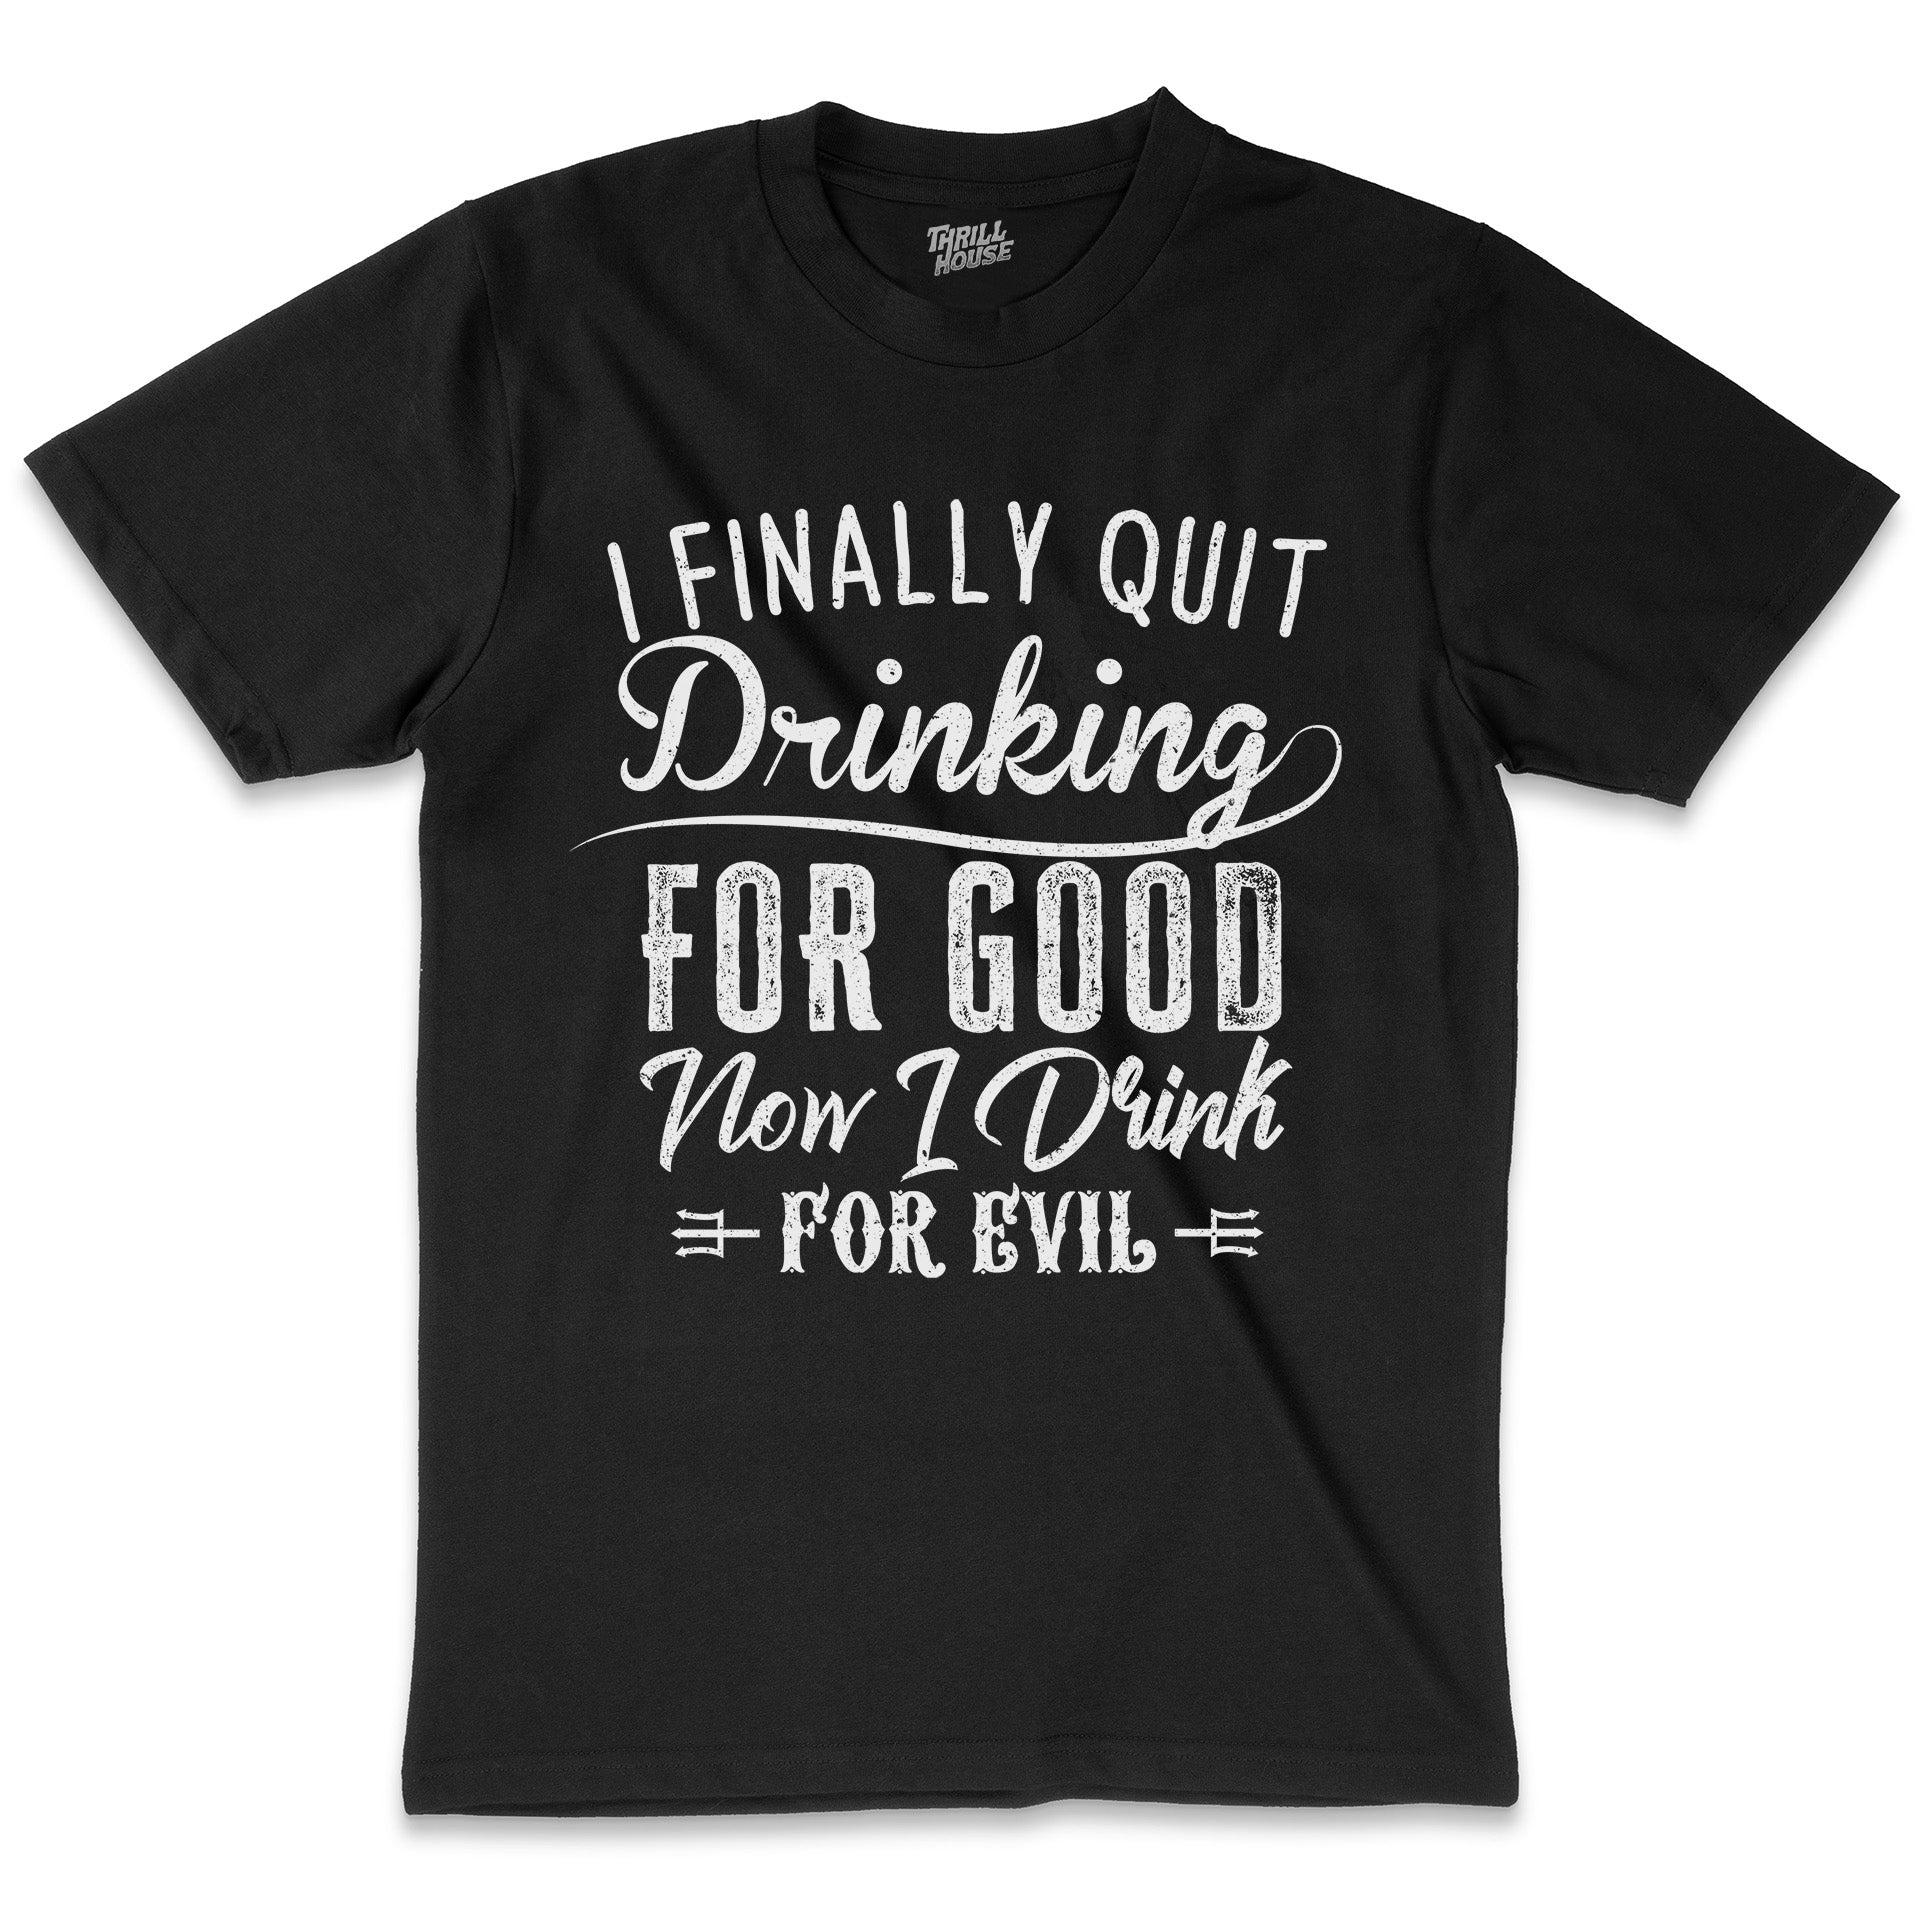 Drink for Evil Funny Beer Booze Drunk Party BBQ Drinking Alcohol Funny Cotton T-Shirt